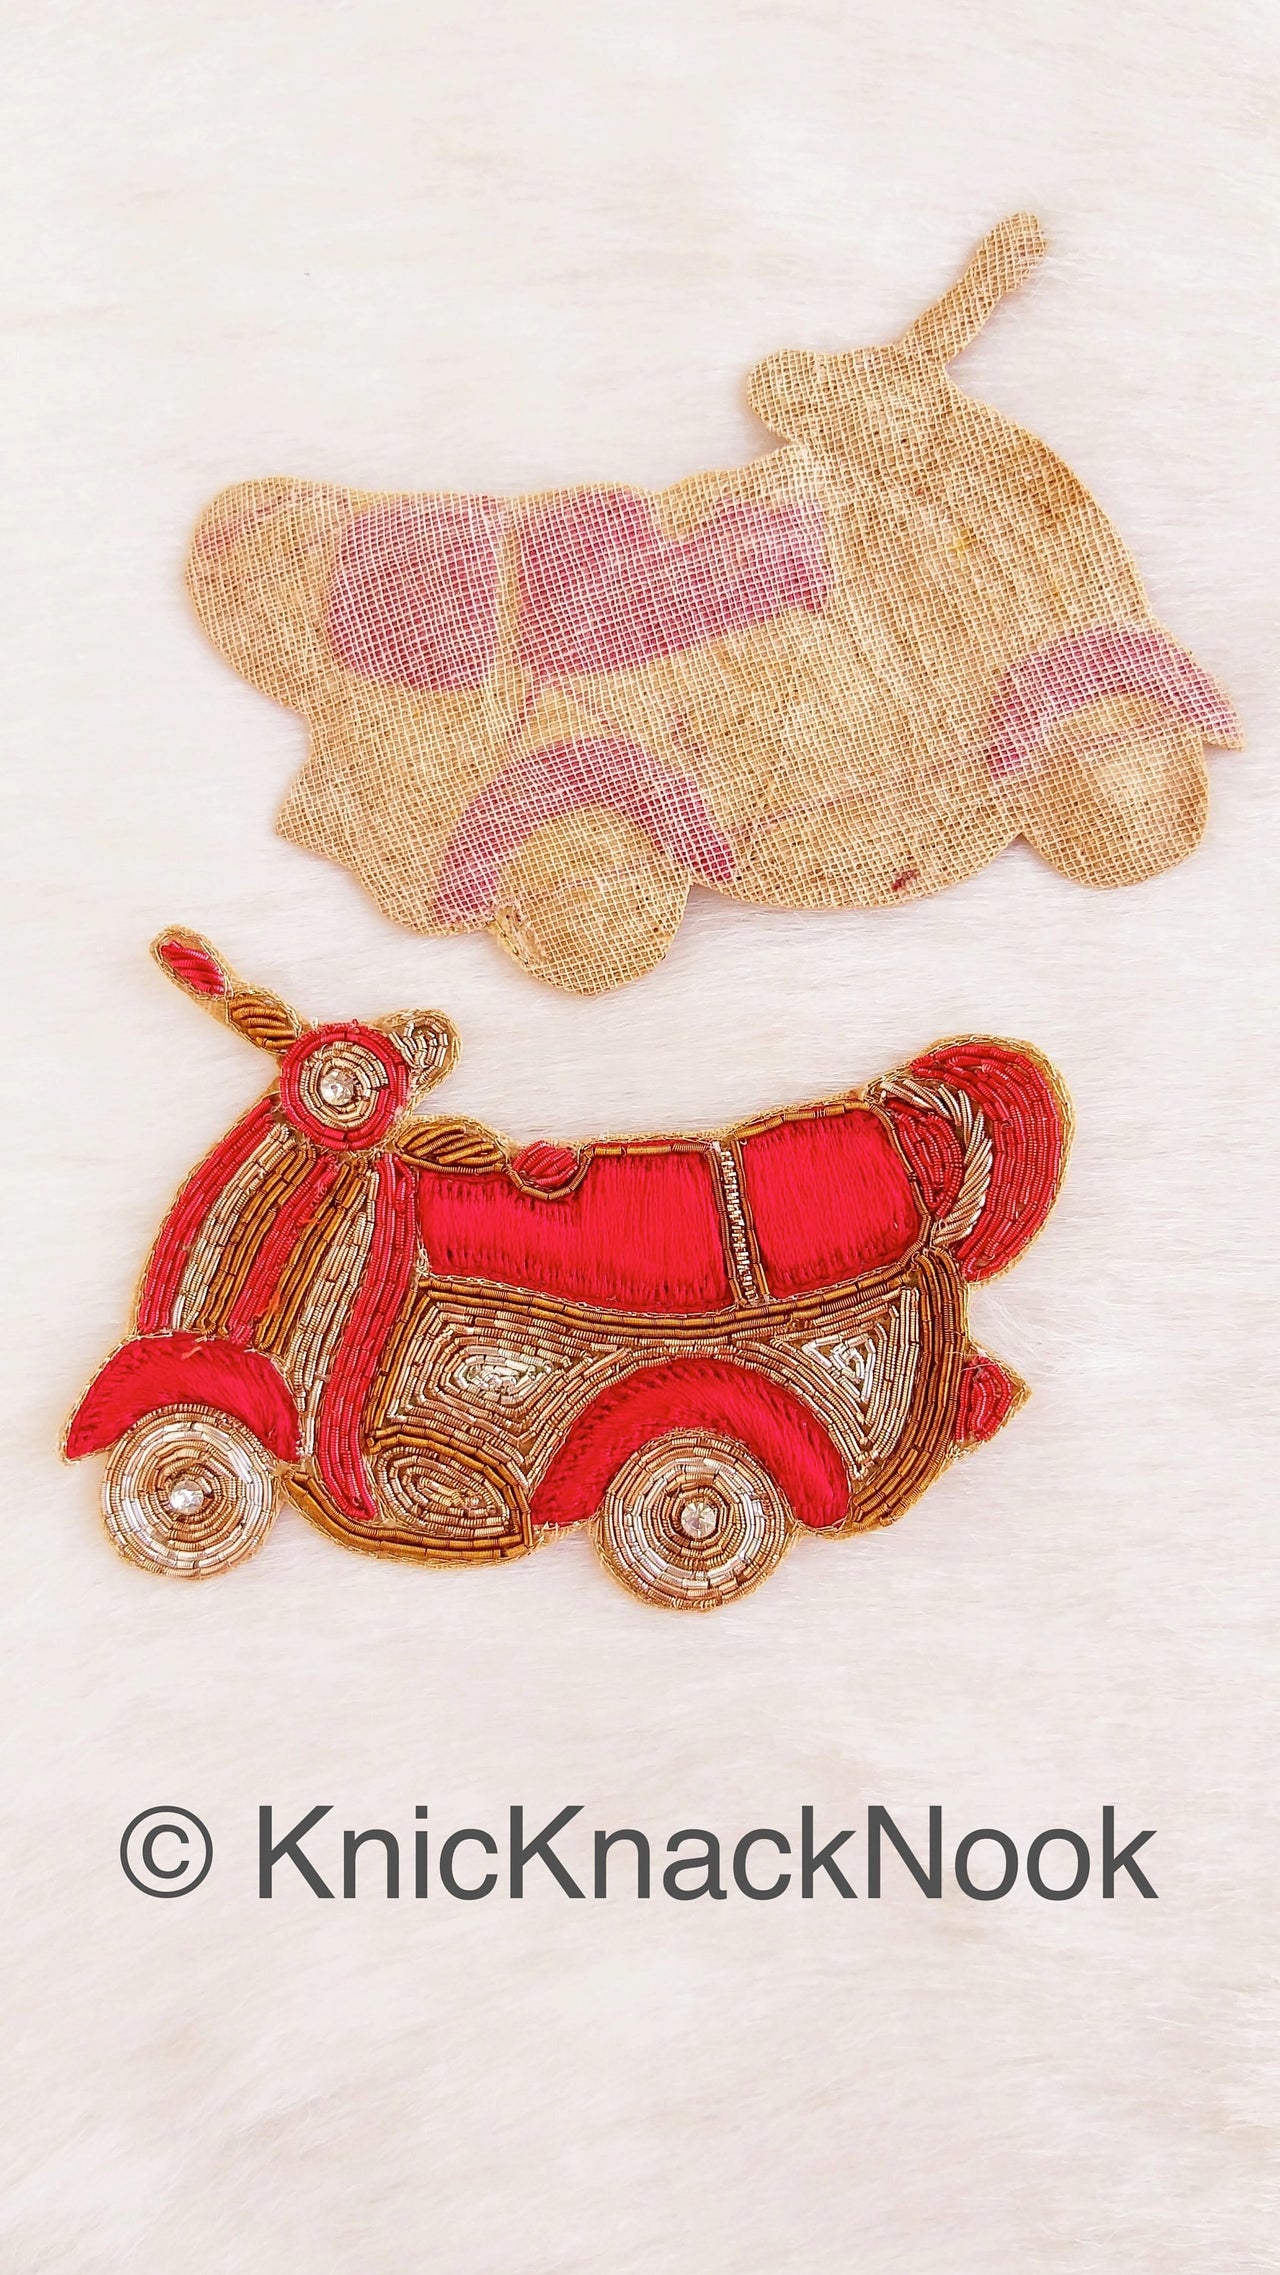 Hand Embroidered Motor Scooter Applique In Red, Gold And Silver Zardozi Threadwork, Motorcycle Motif